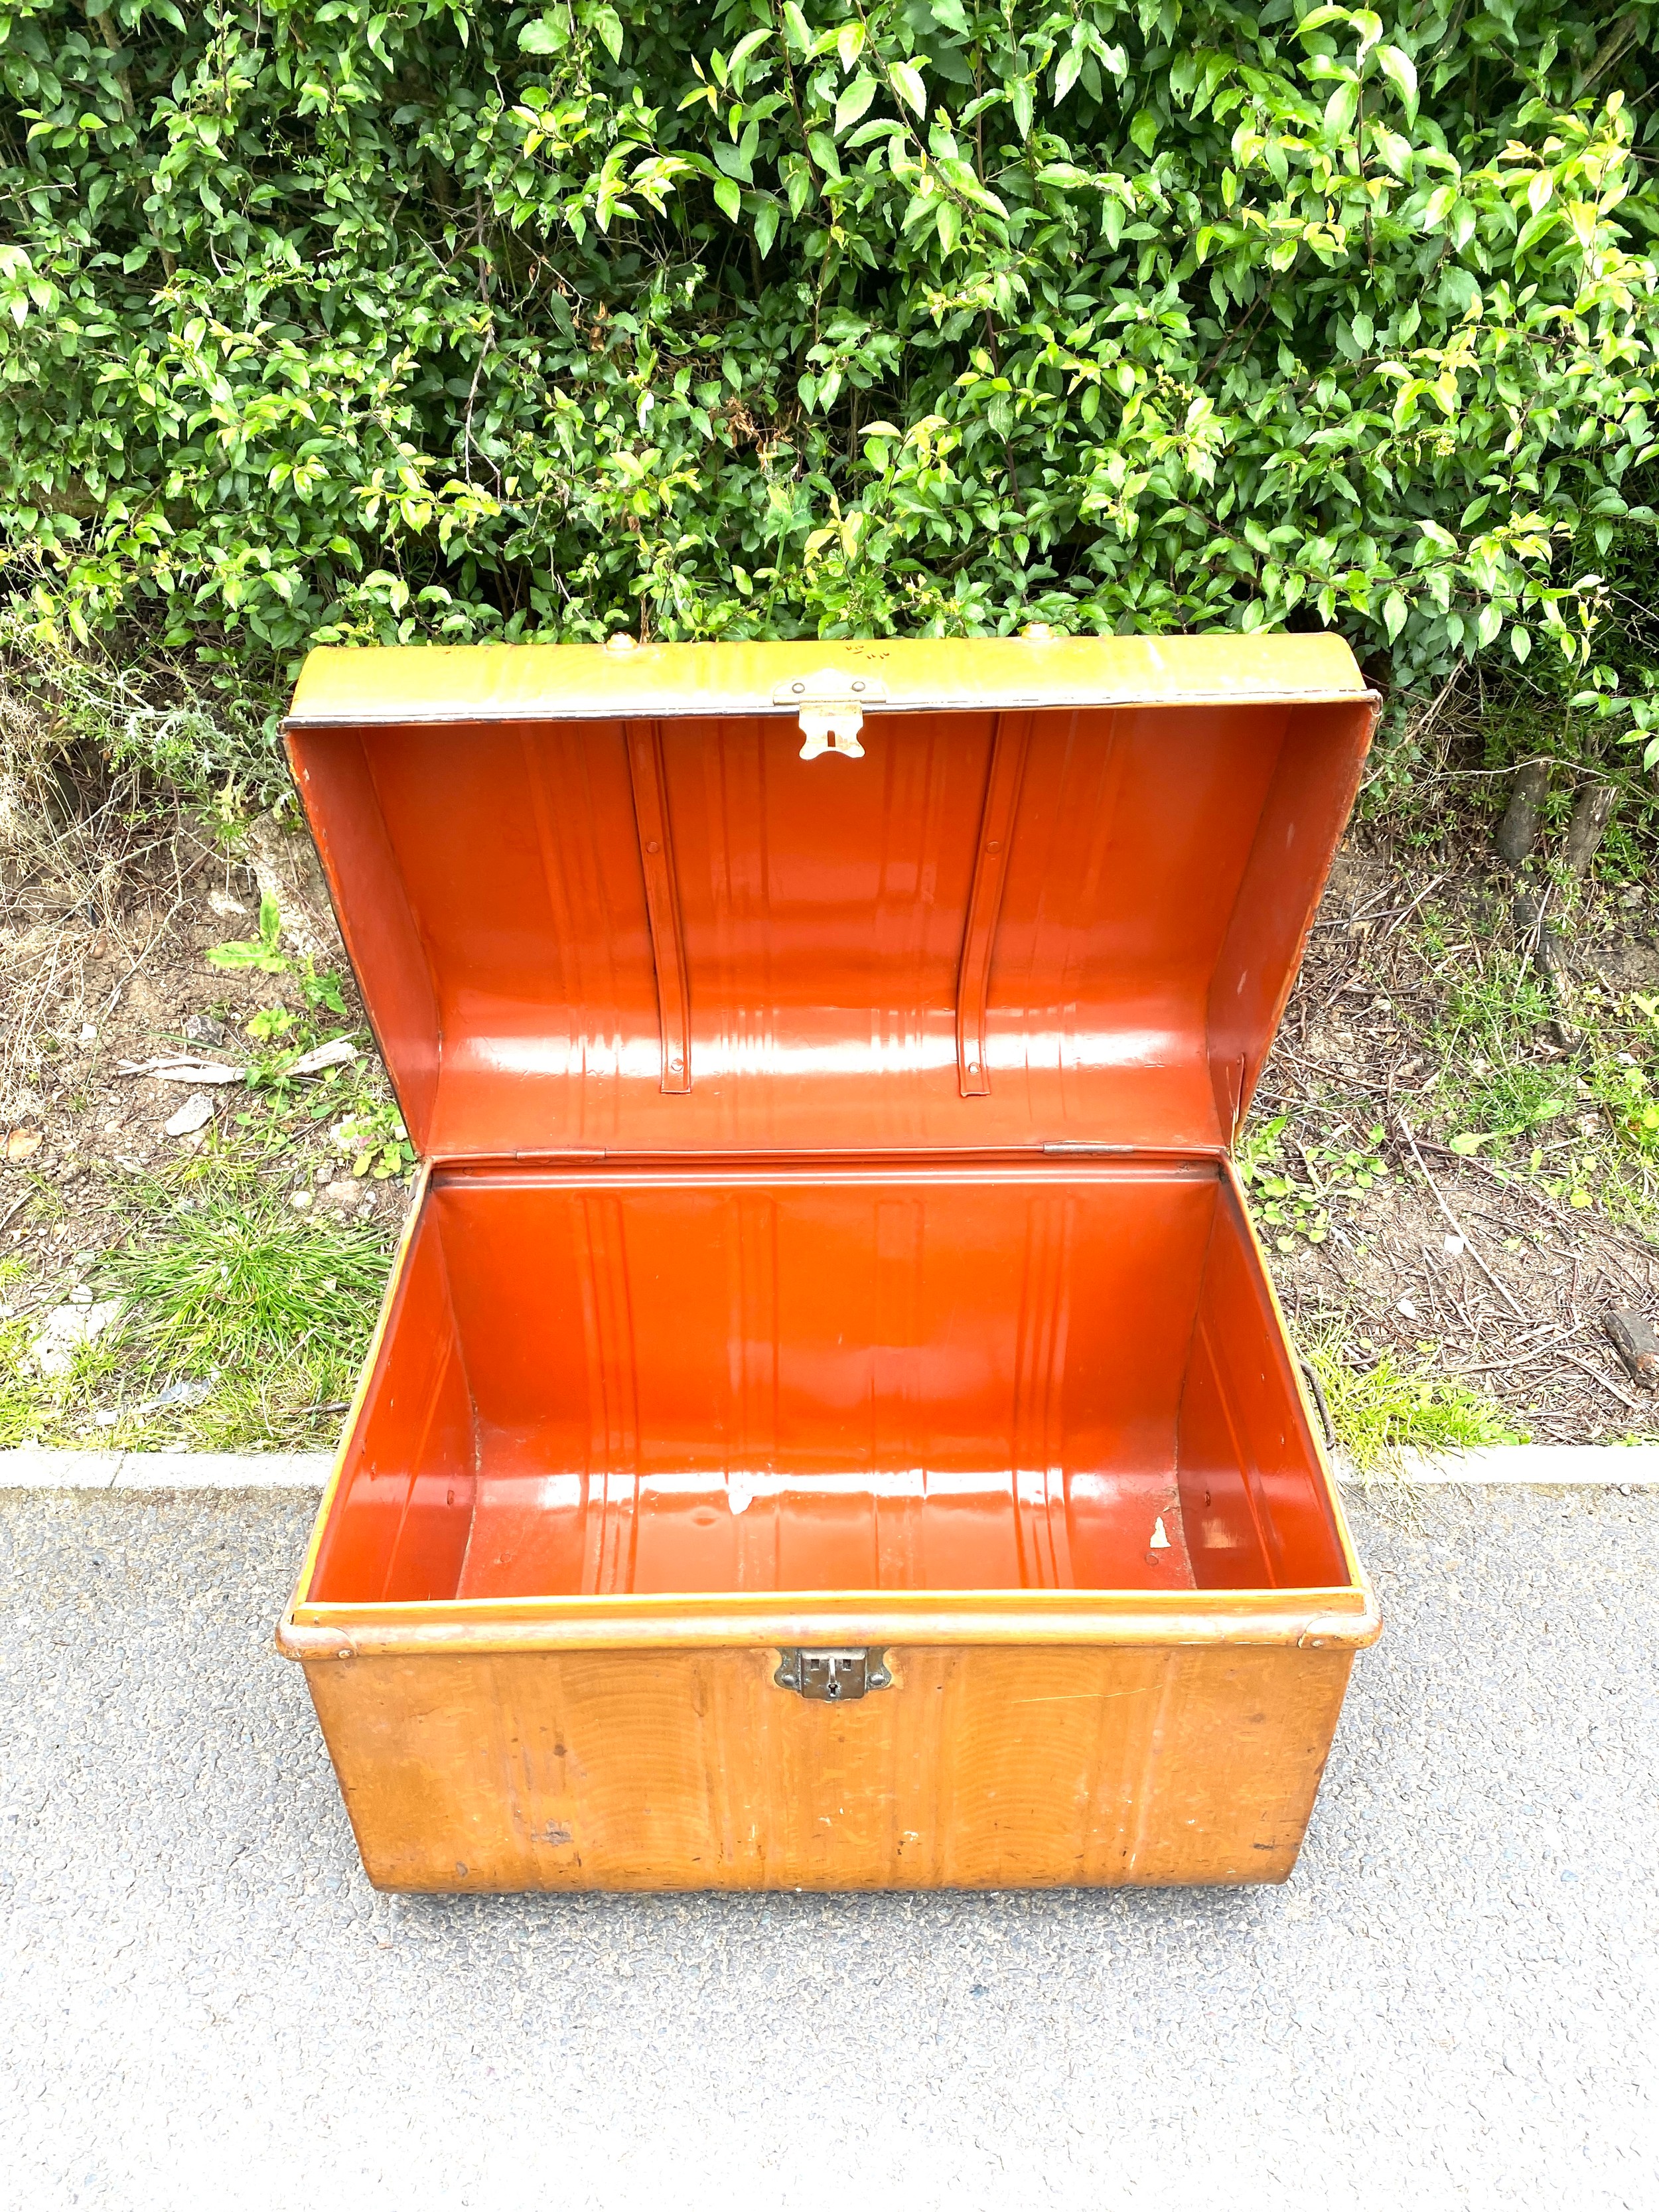 Vintage metal travel trunk, approximate measurements: Height 19.5 inches, Width 25 inches, Depth - Image 2 of 2